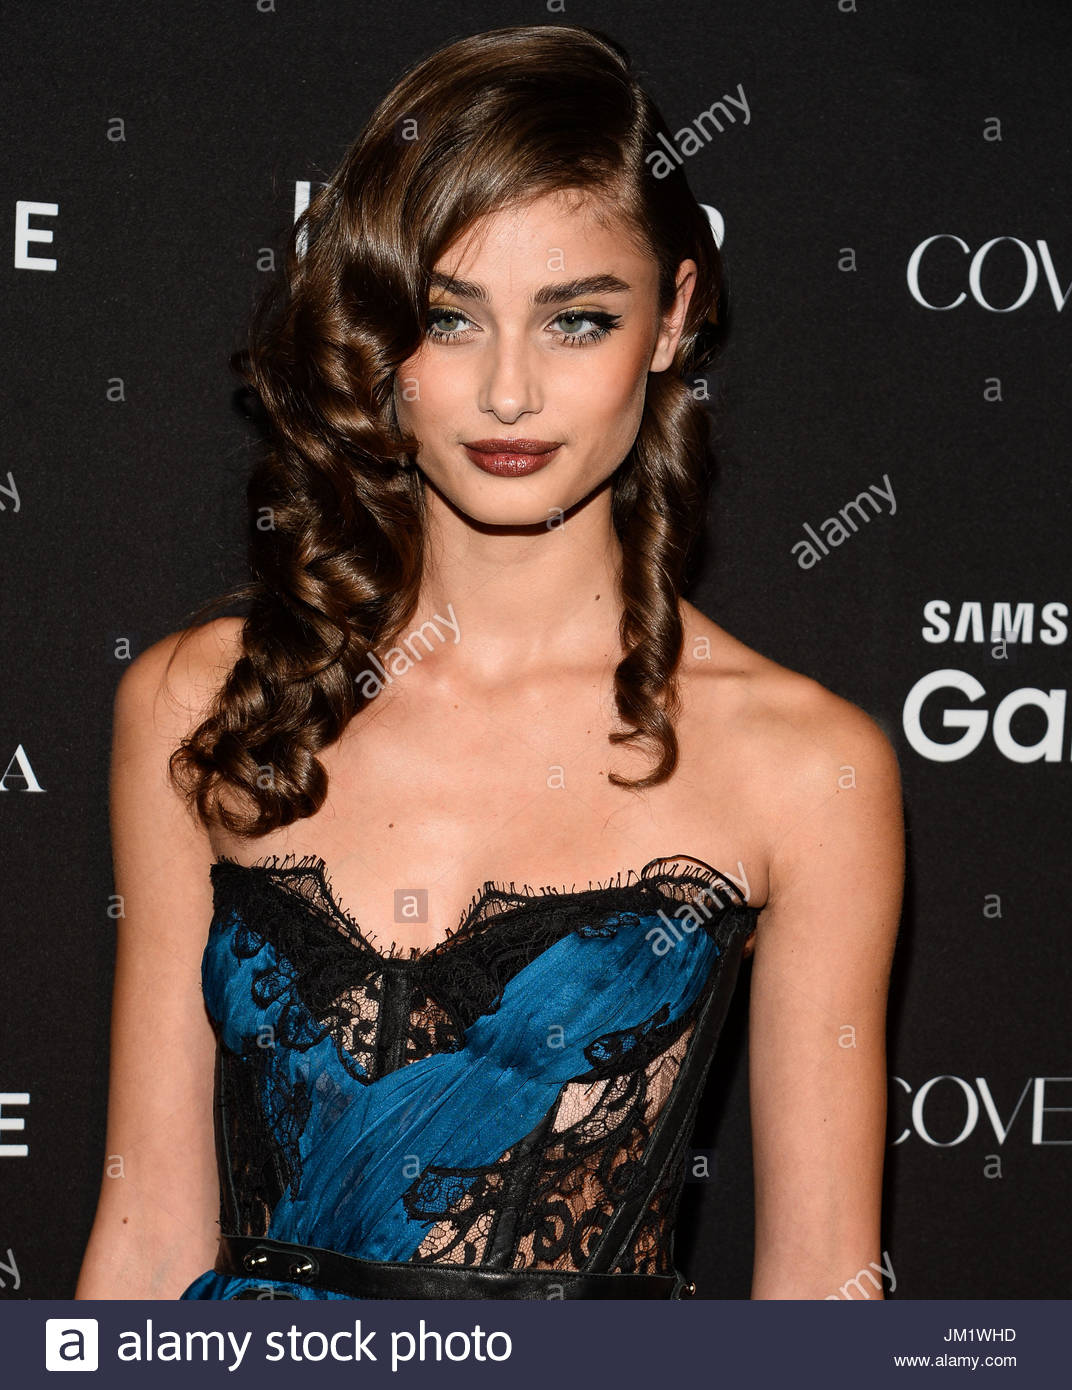 [Image: taylor-marie-hill-celebrity-arrivals-at-...JM1WHD.jpg]